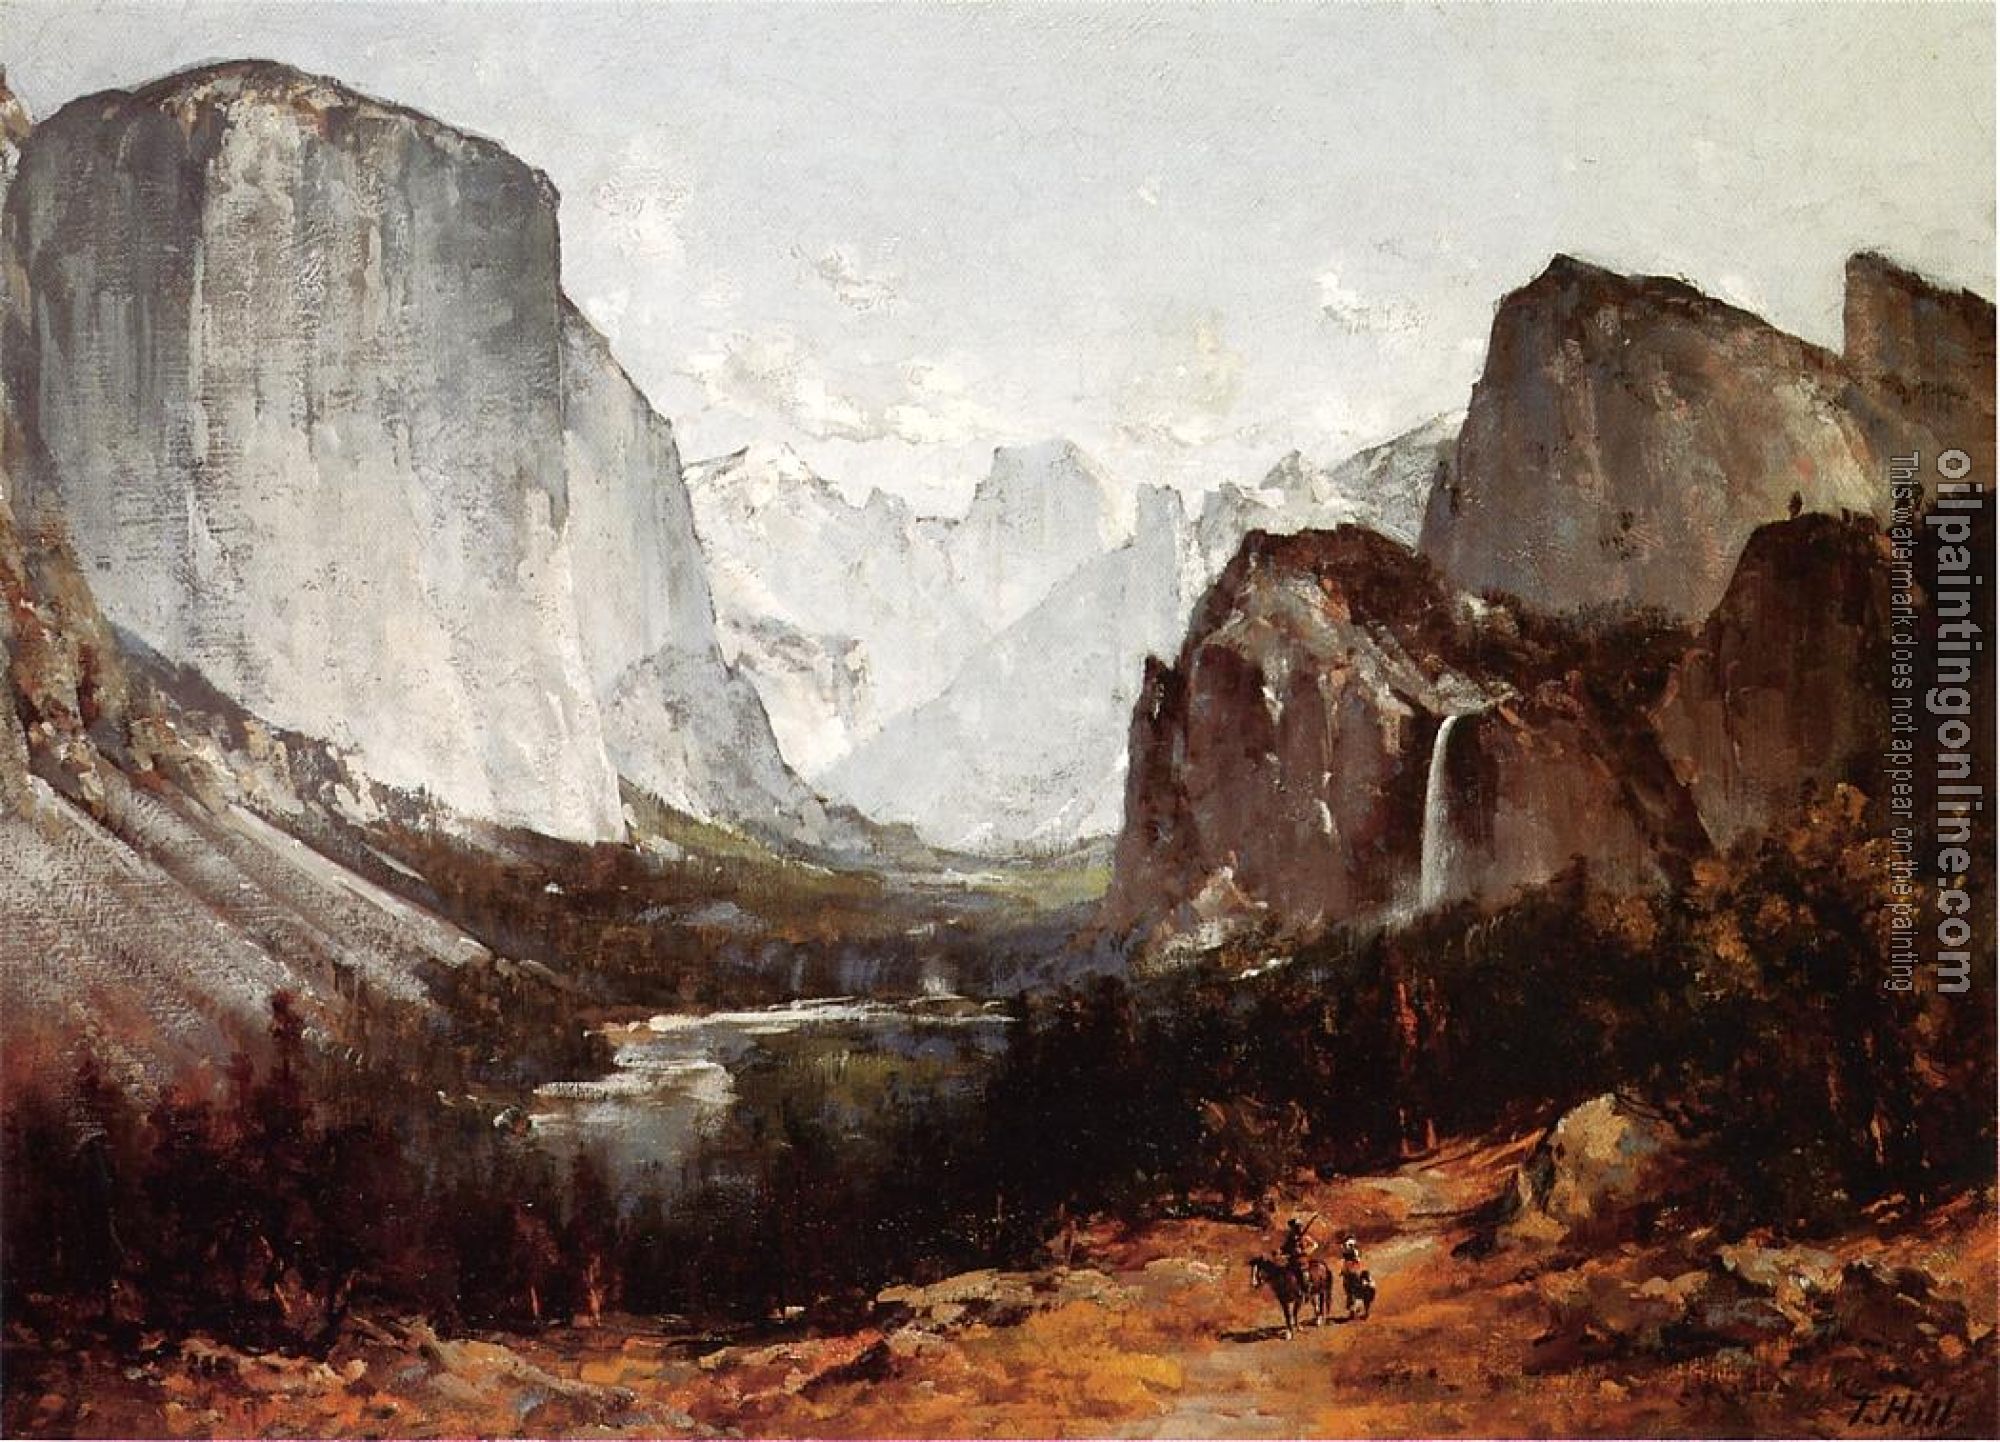 Thomas Hill - A View of Yosemite Valley